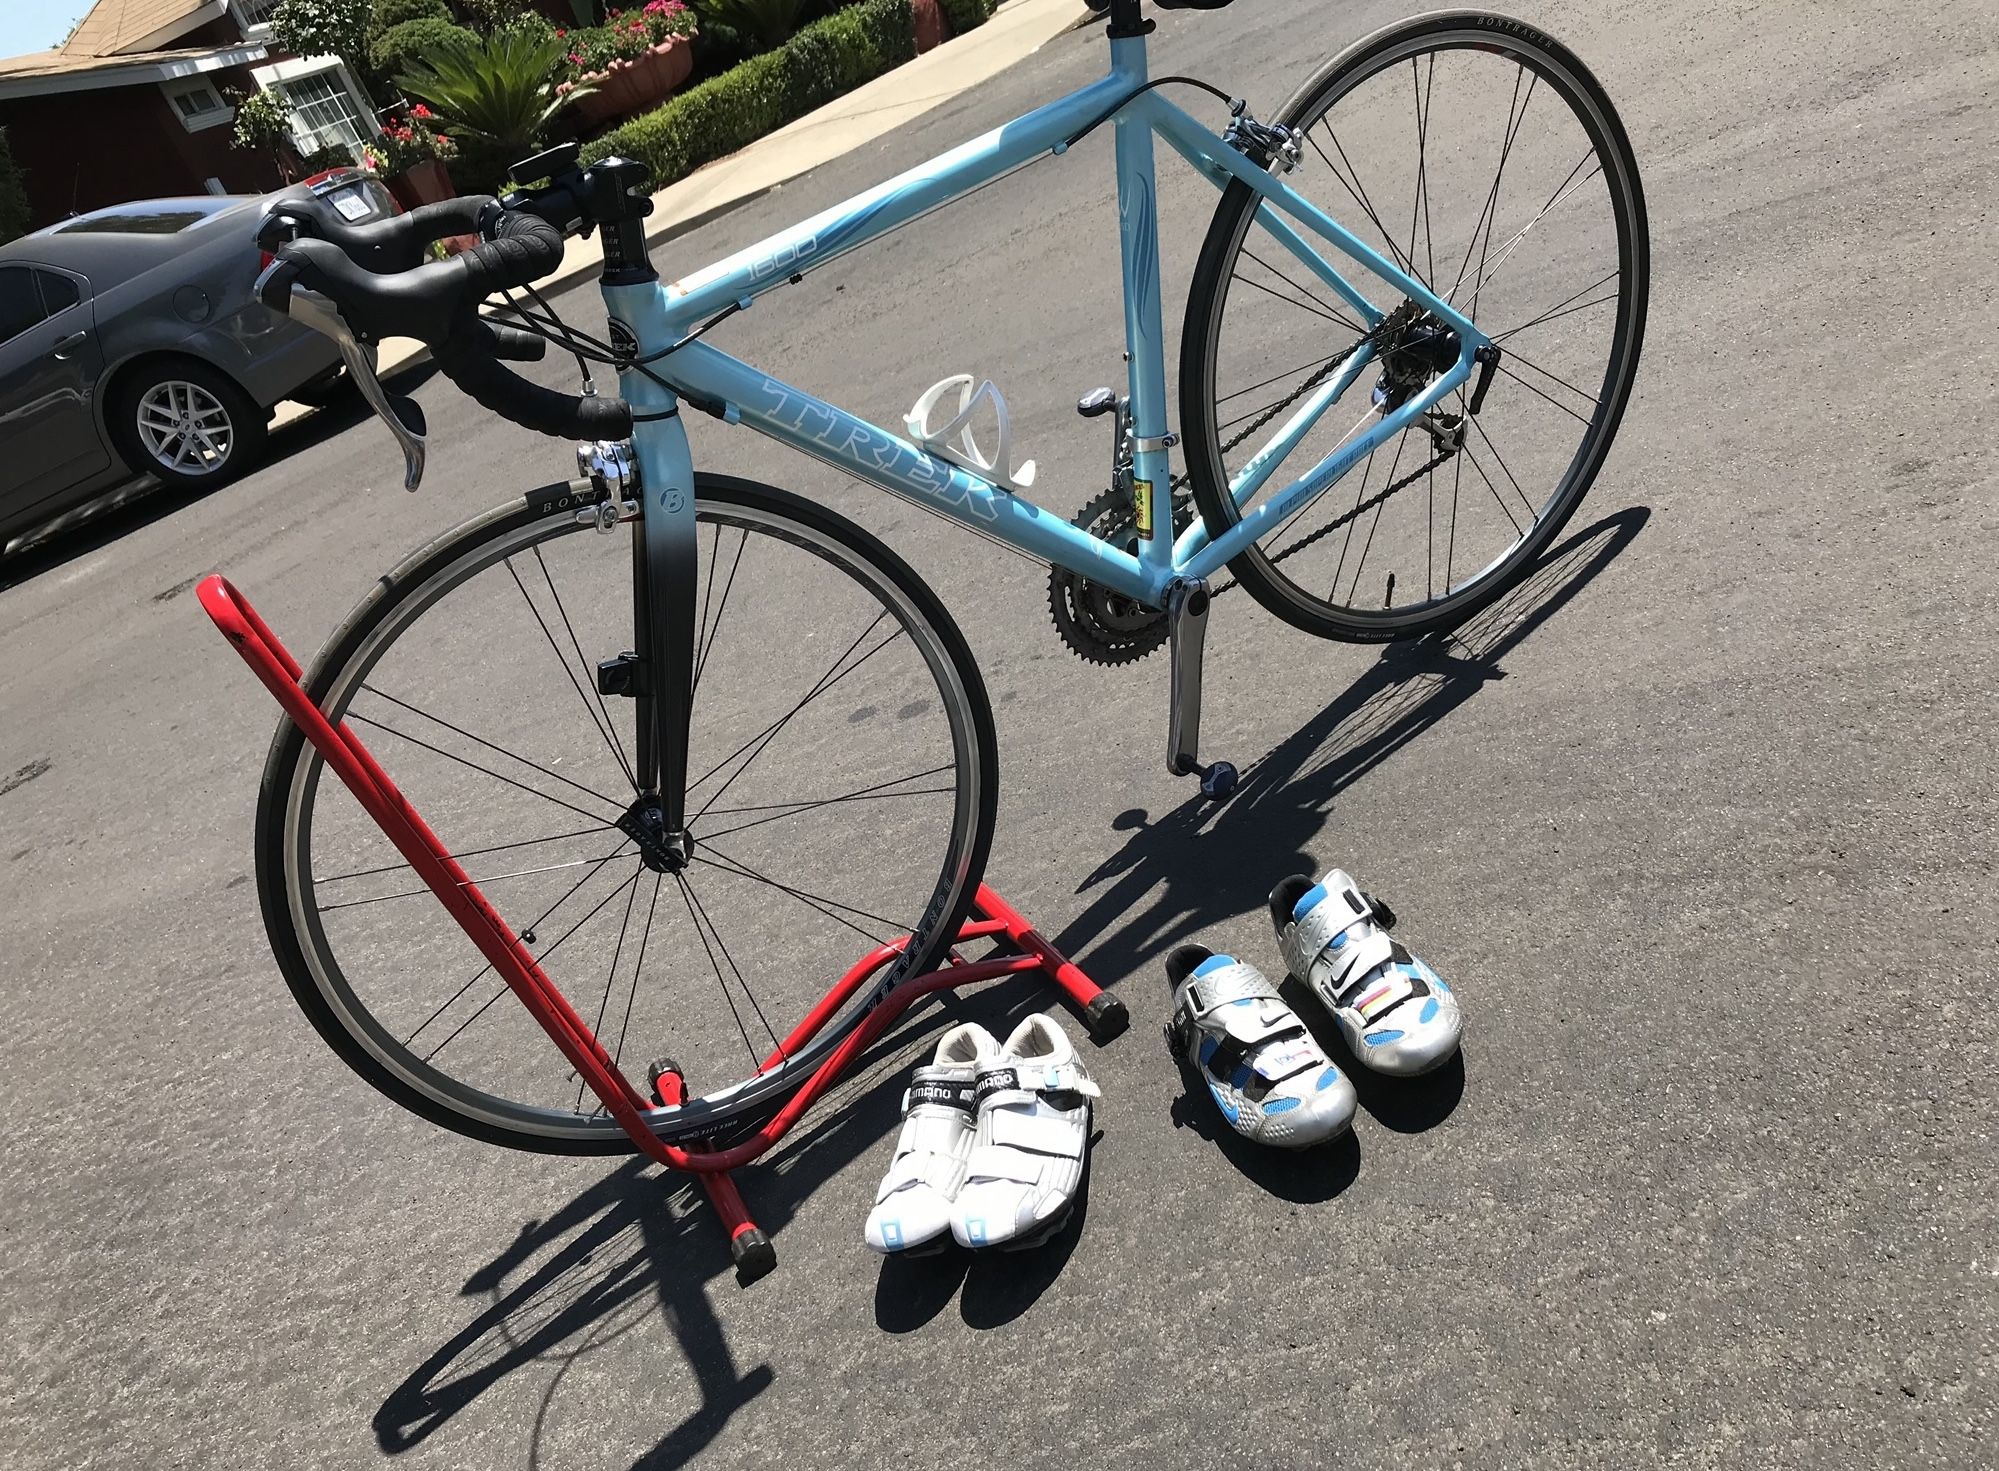 Trek 1600 WSD road bike great shape with 2 pairs Nike shoes ready to ride with manual 54’’ sz frame